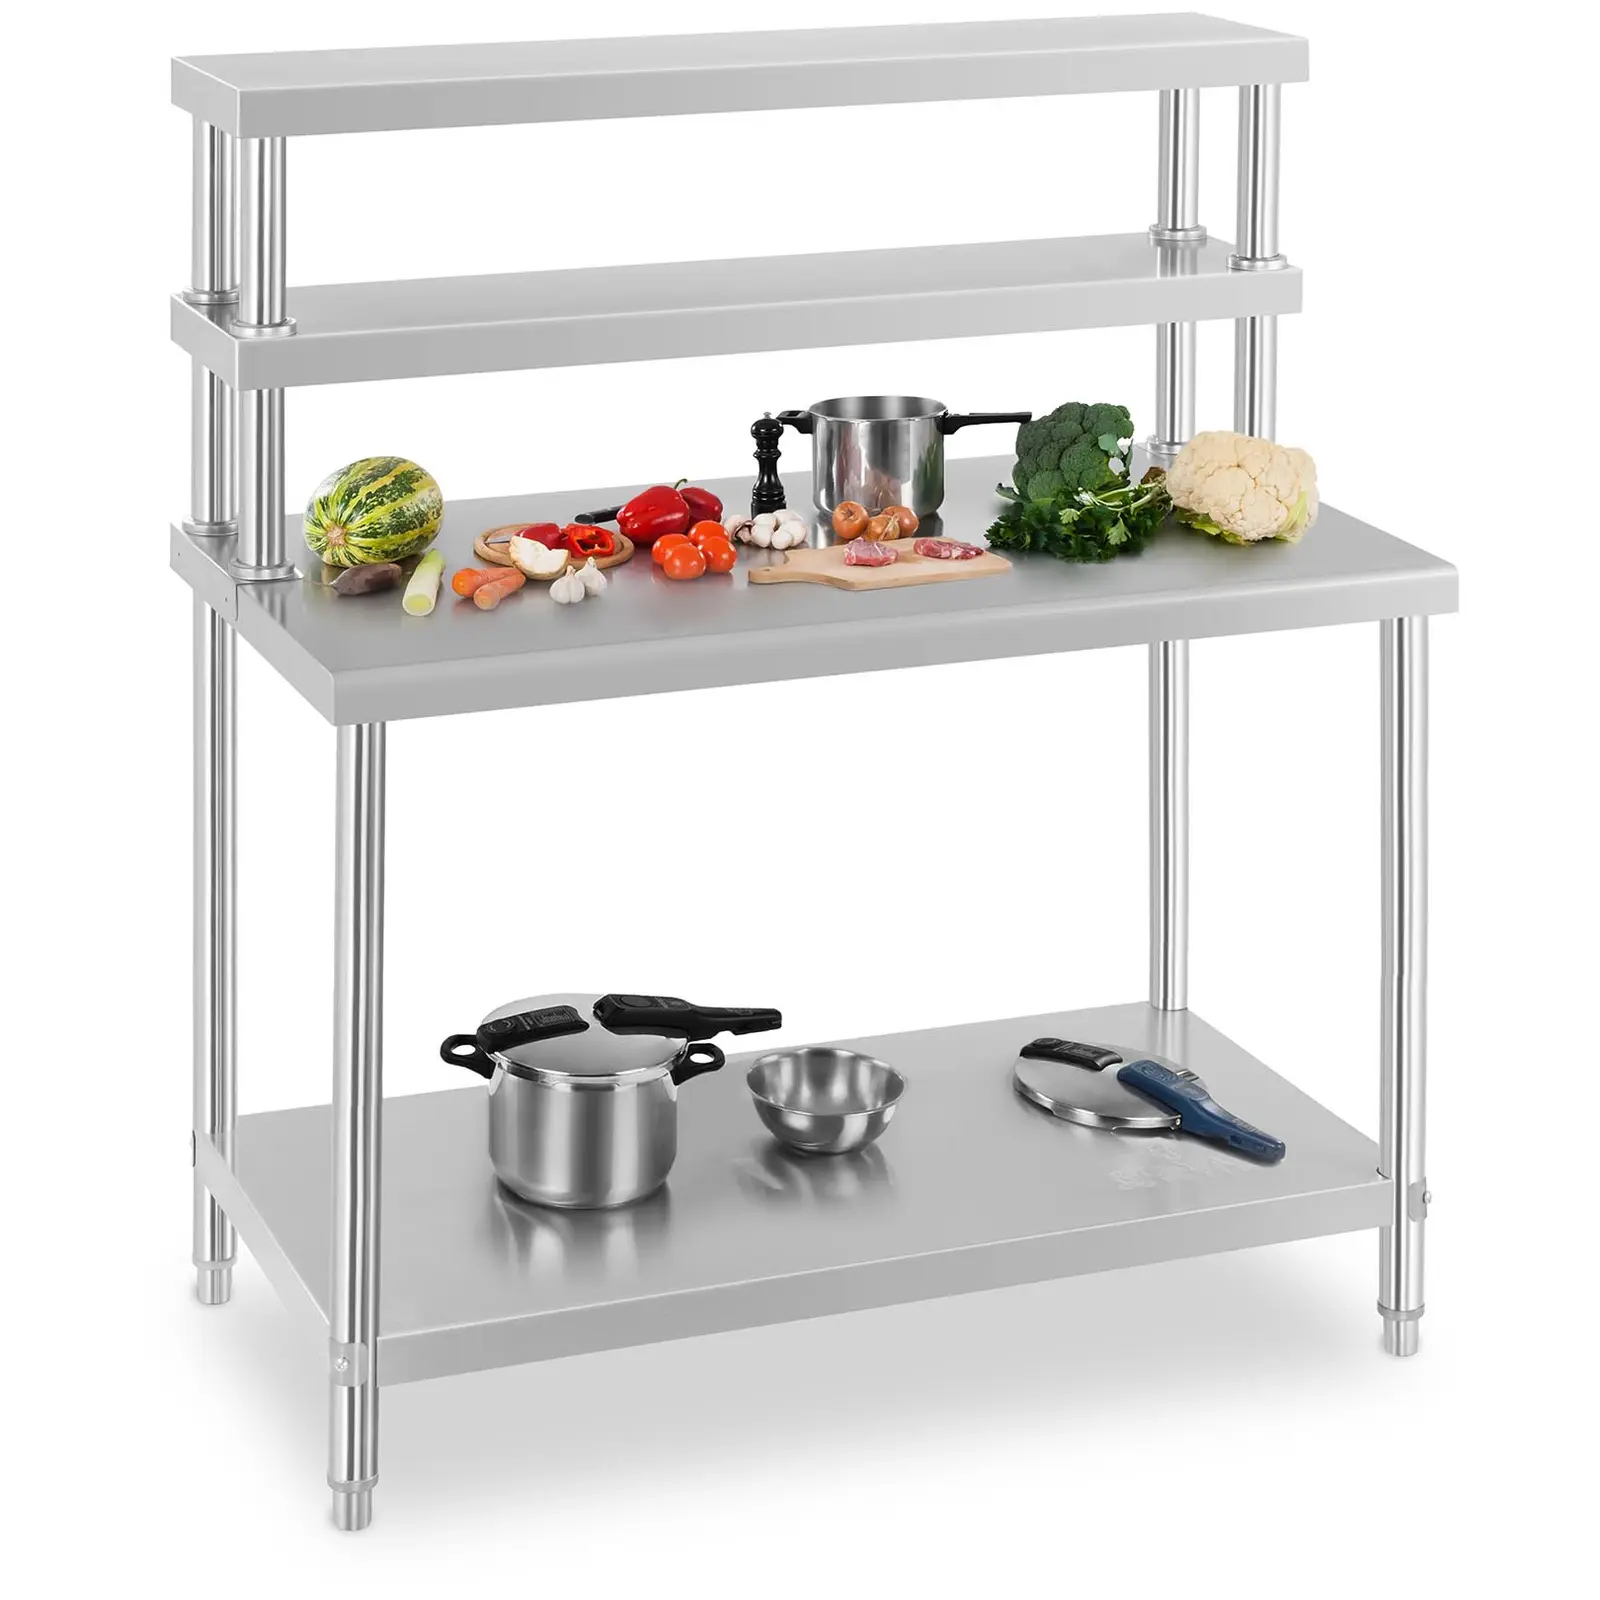 Commercial Stainless Steel Table And Shelf - 120 x 70 cm